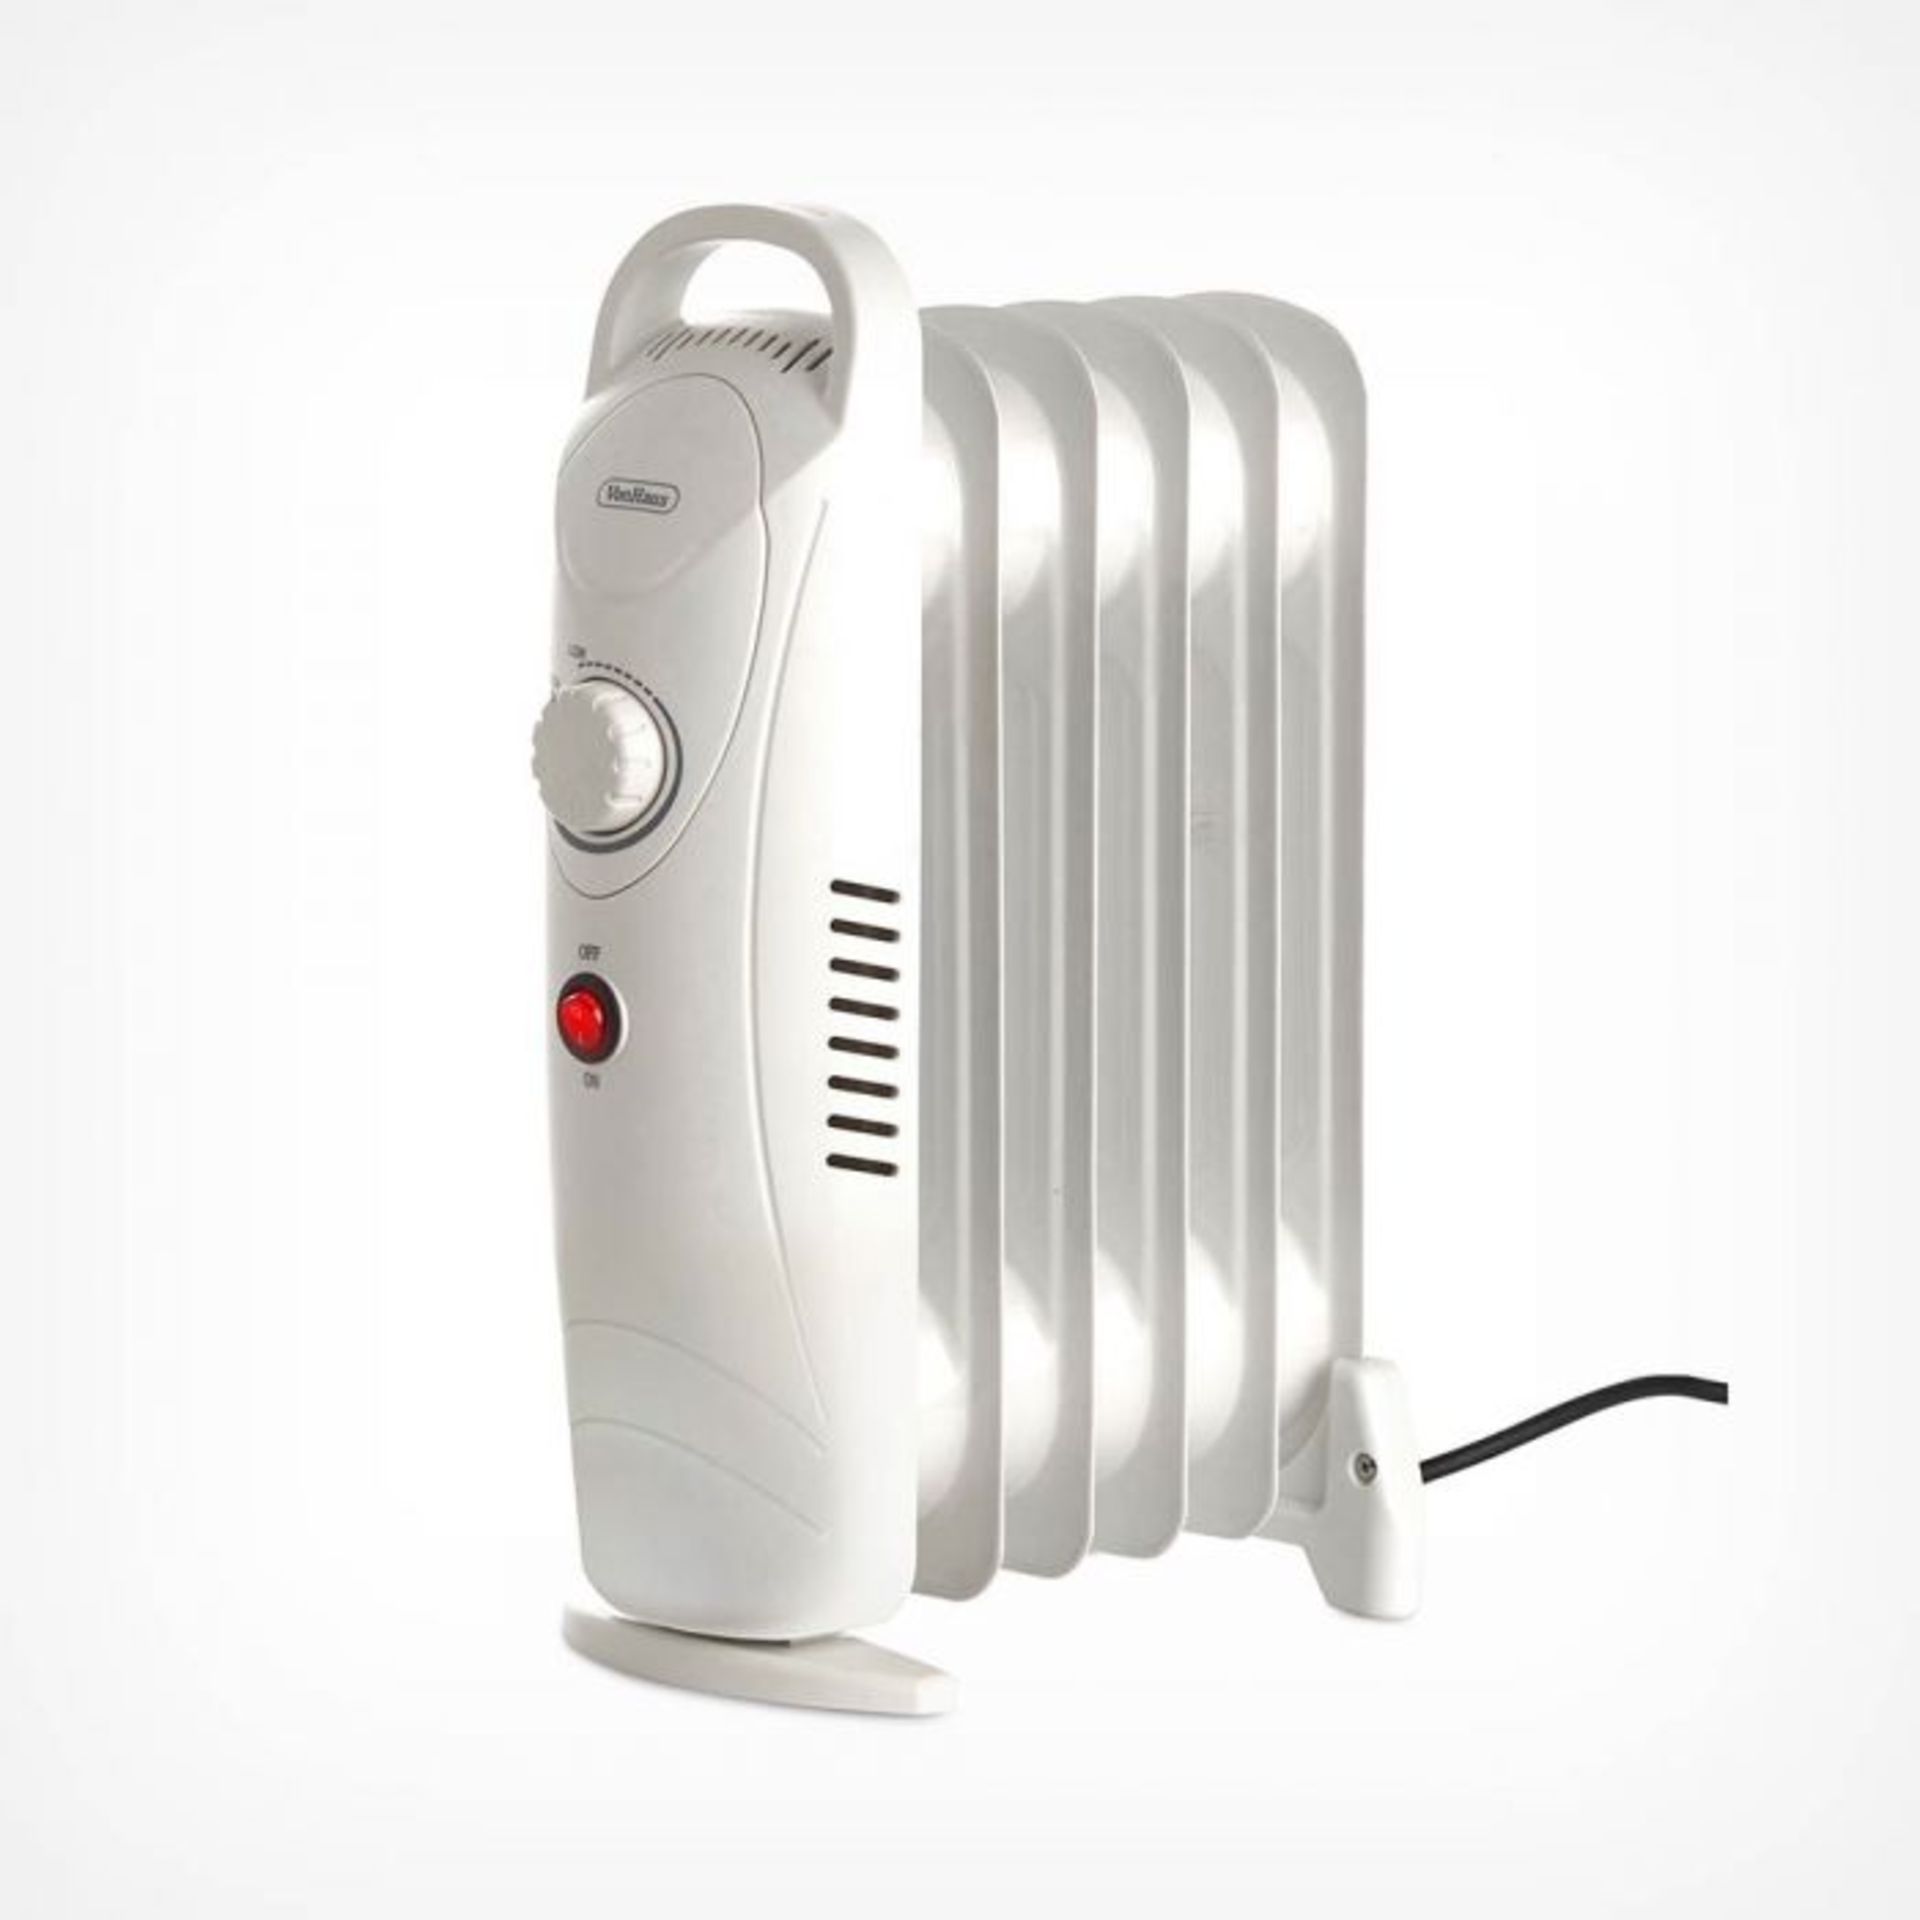 (S72) 6 Fin 800W Oil Filled Radiator - White Compact yet powerful 800W radiator with 6 oil-fil... - Image 2 of 3